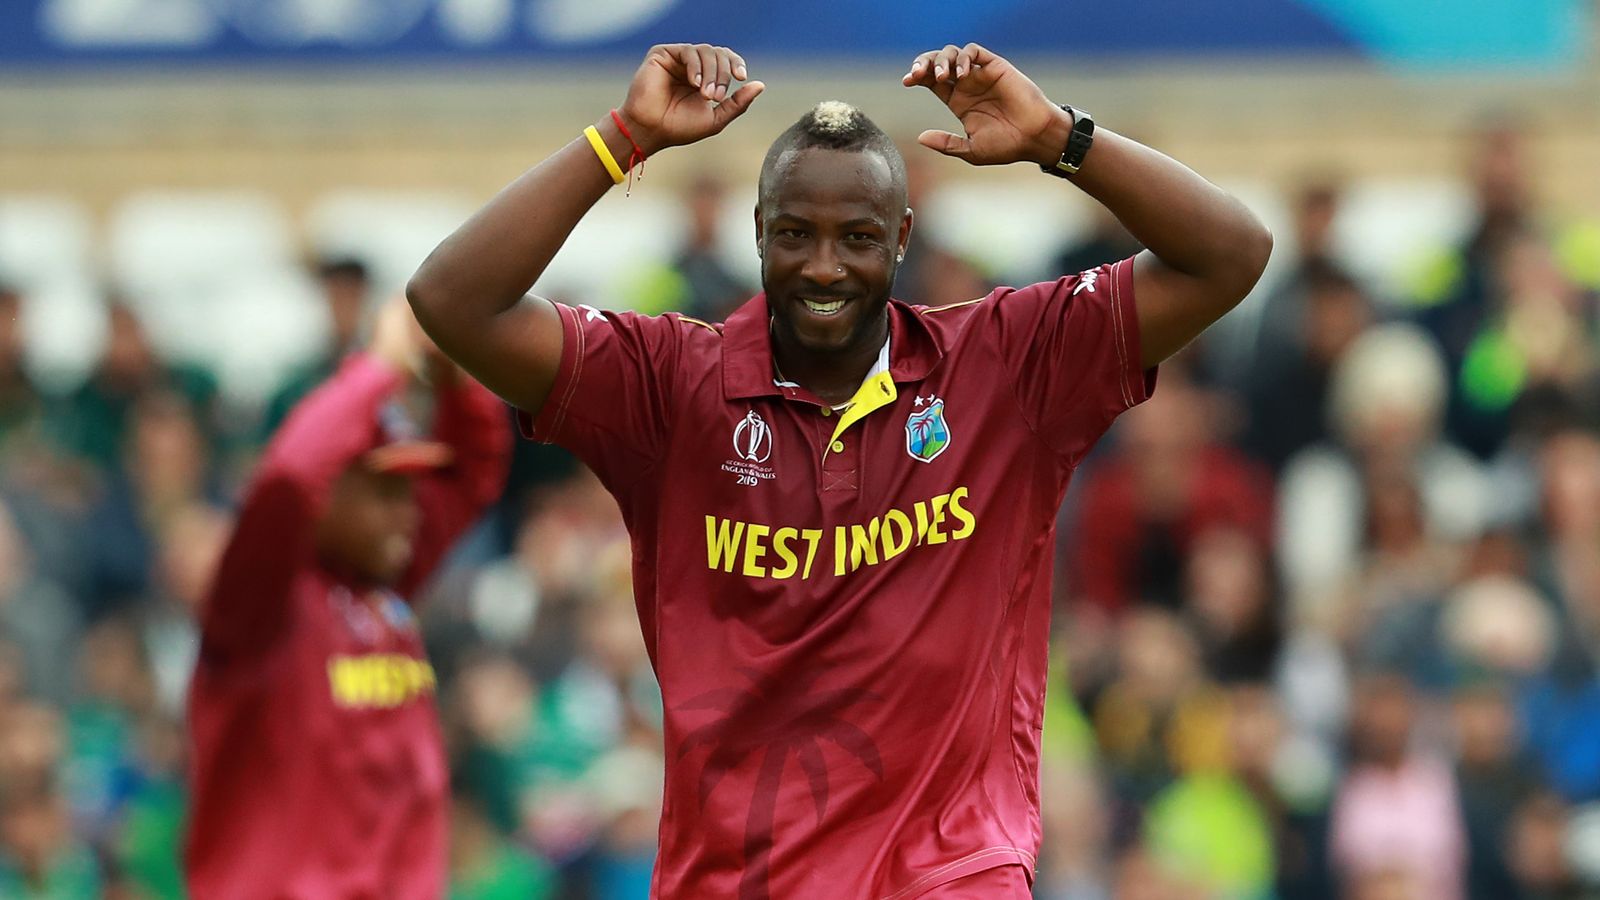 West Indies play Bangladesh in the Cricket World Cup on Monday | Cricket News | Sky Sports